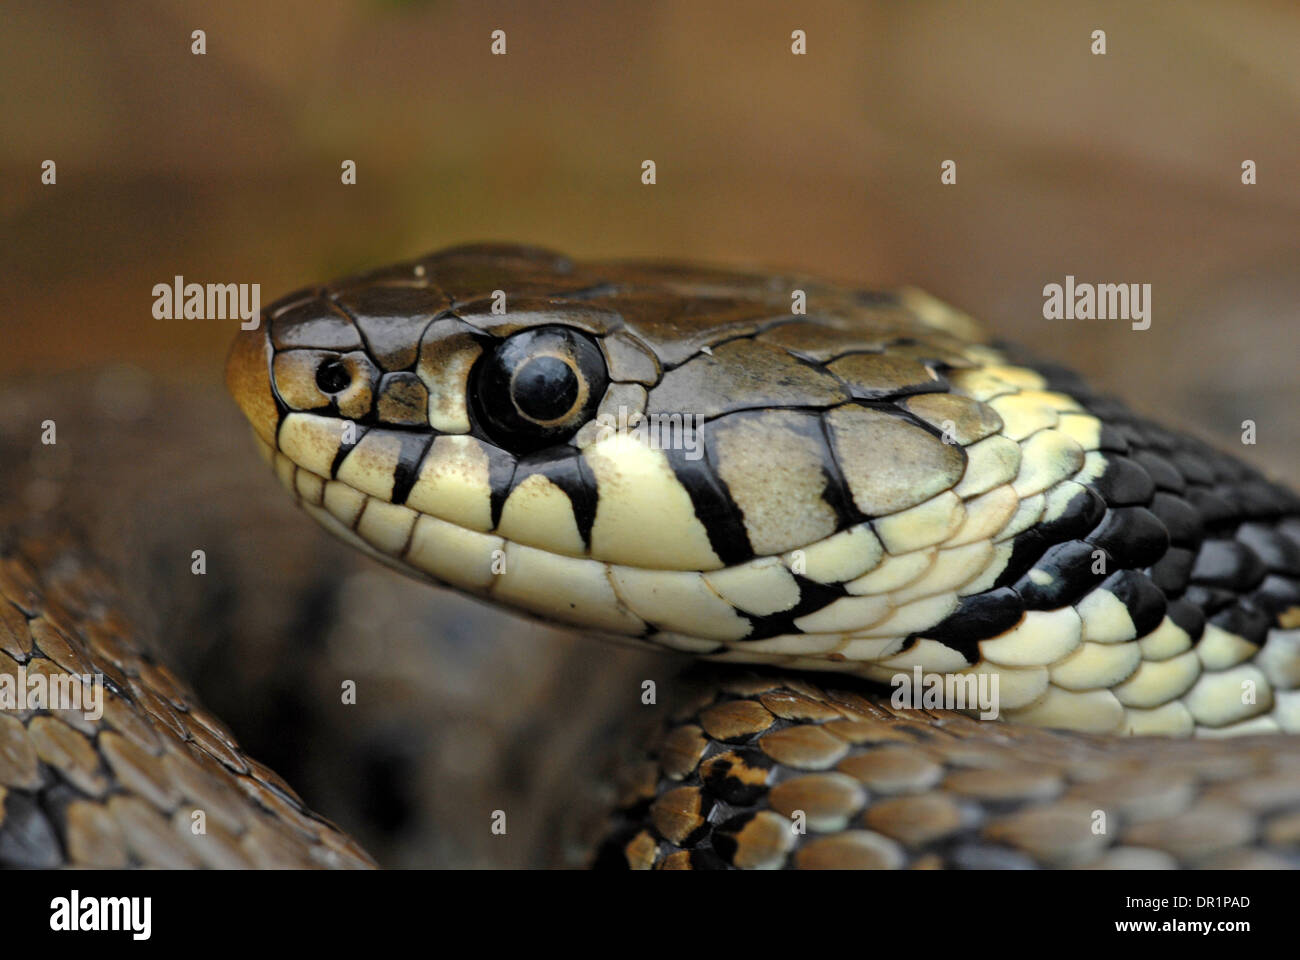 Grass snake (Natrix natrix). Recent research has suggested this animal be reclassified as Natrix helvetica. Stock Photo